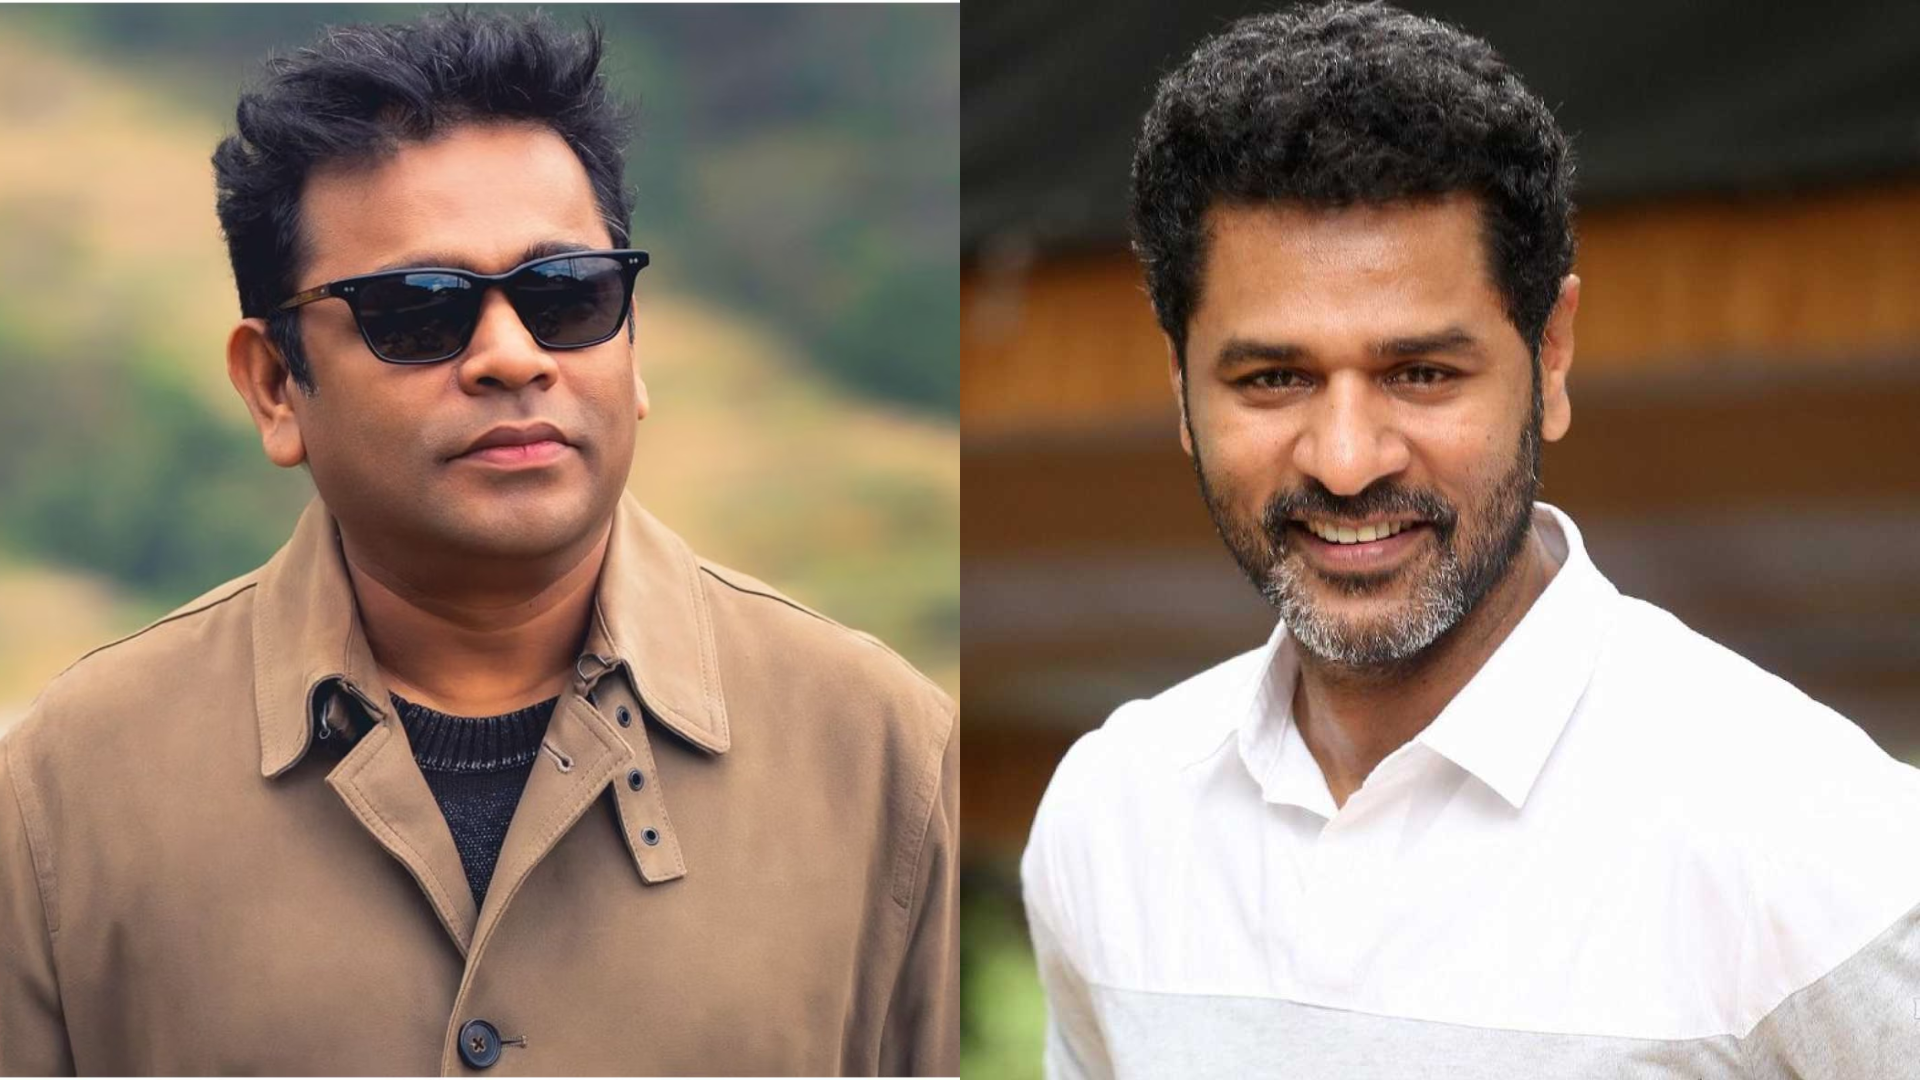 AR Rahman And Prabhudheva All Set To Unite After A Gap Of 25 Years For ‘ARRPD6’- Check First Poster Here!